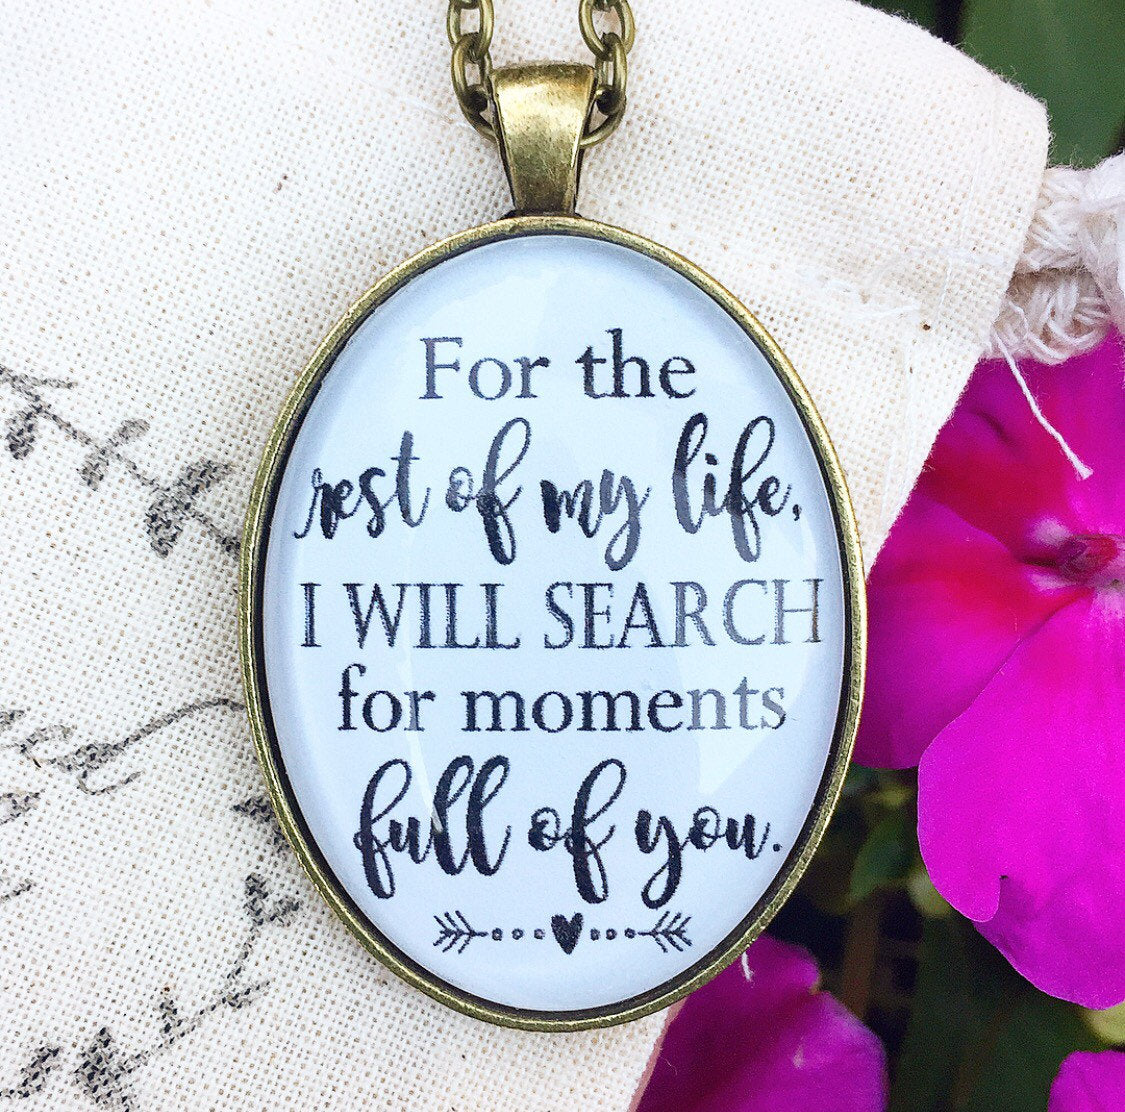 Pendant Necklace "For the rest of my life I will search for moments full of you." - Redeemed Jewelry